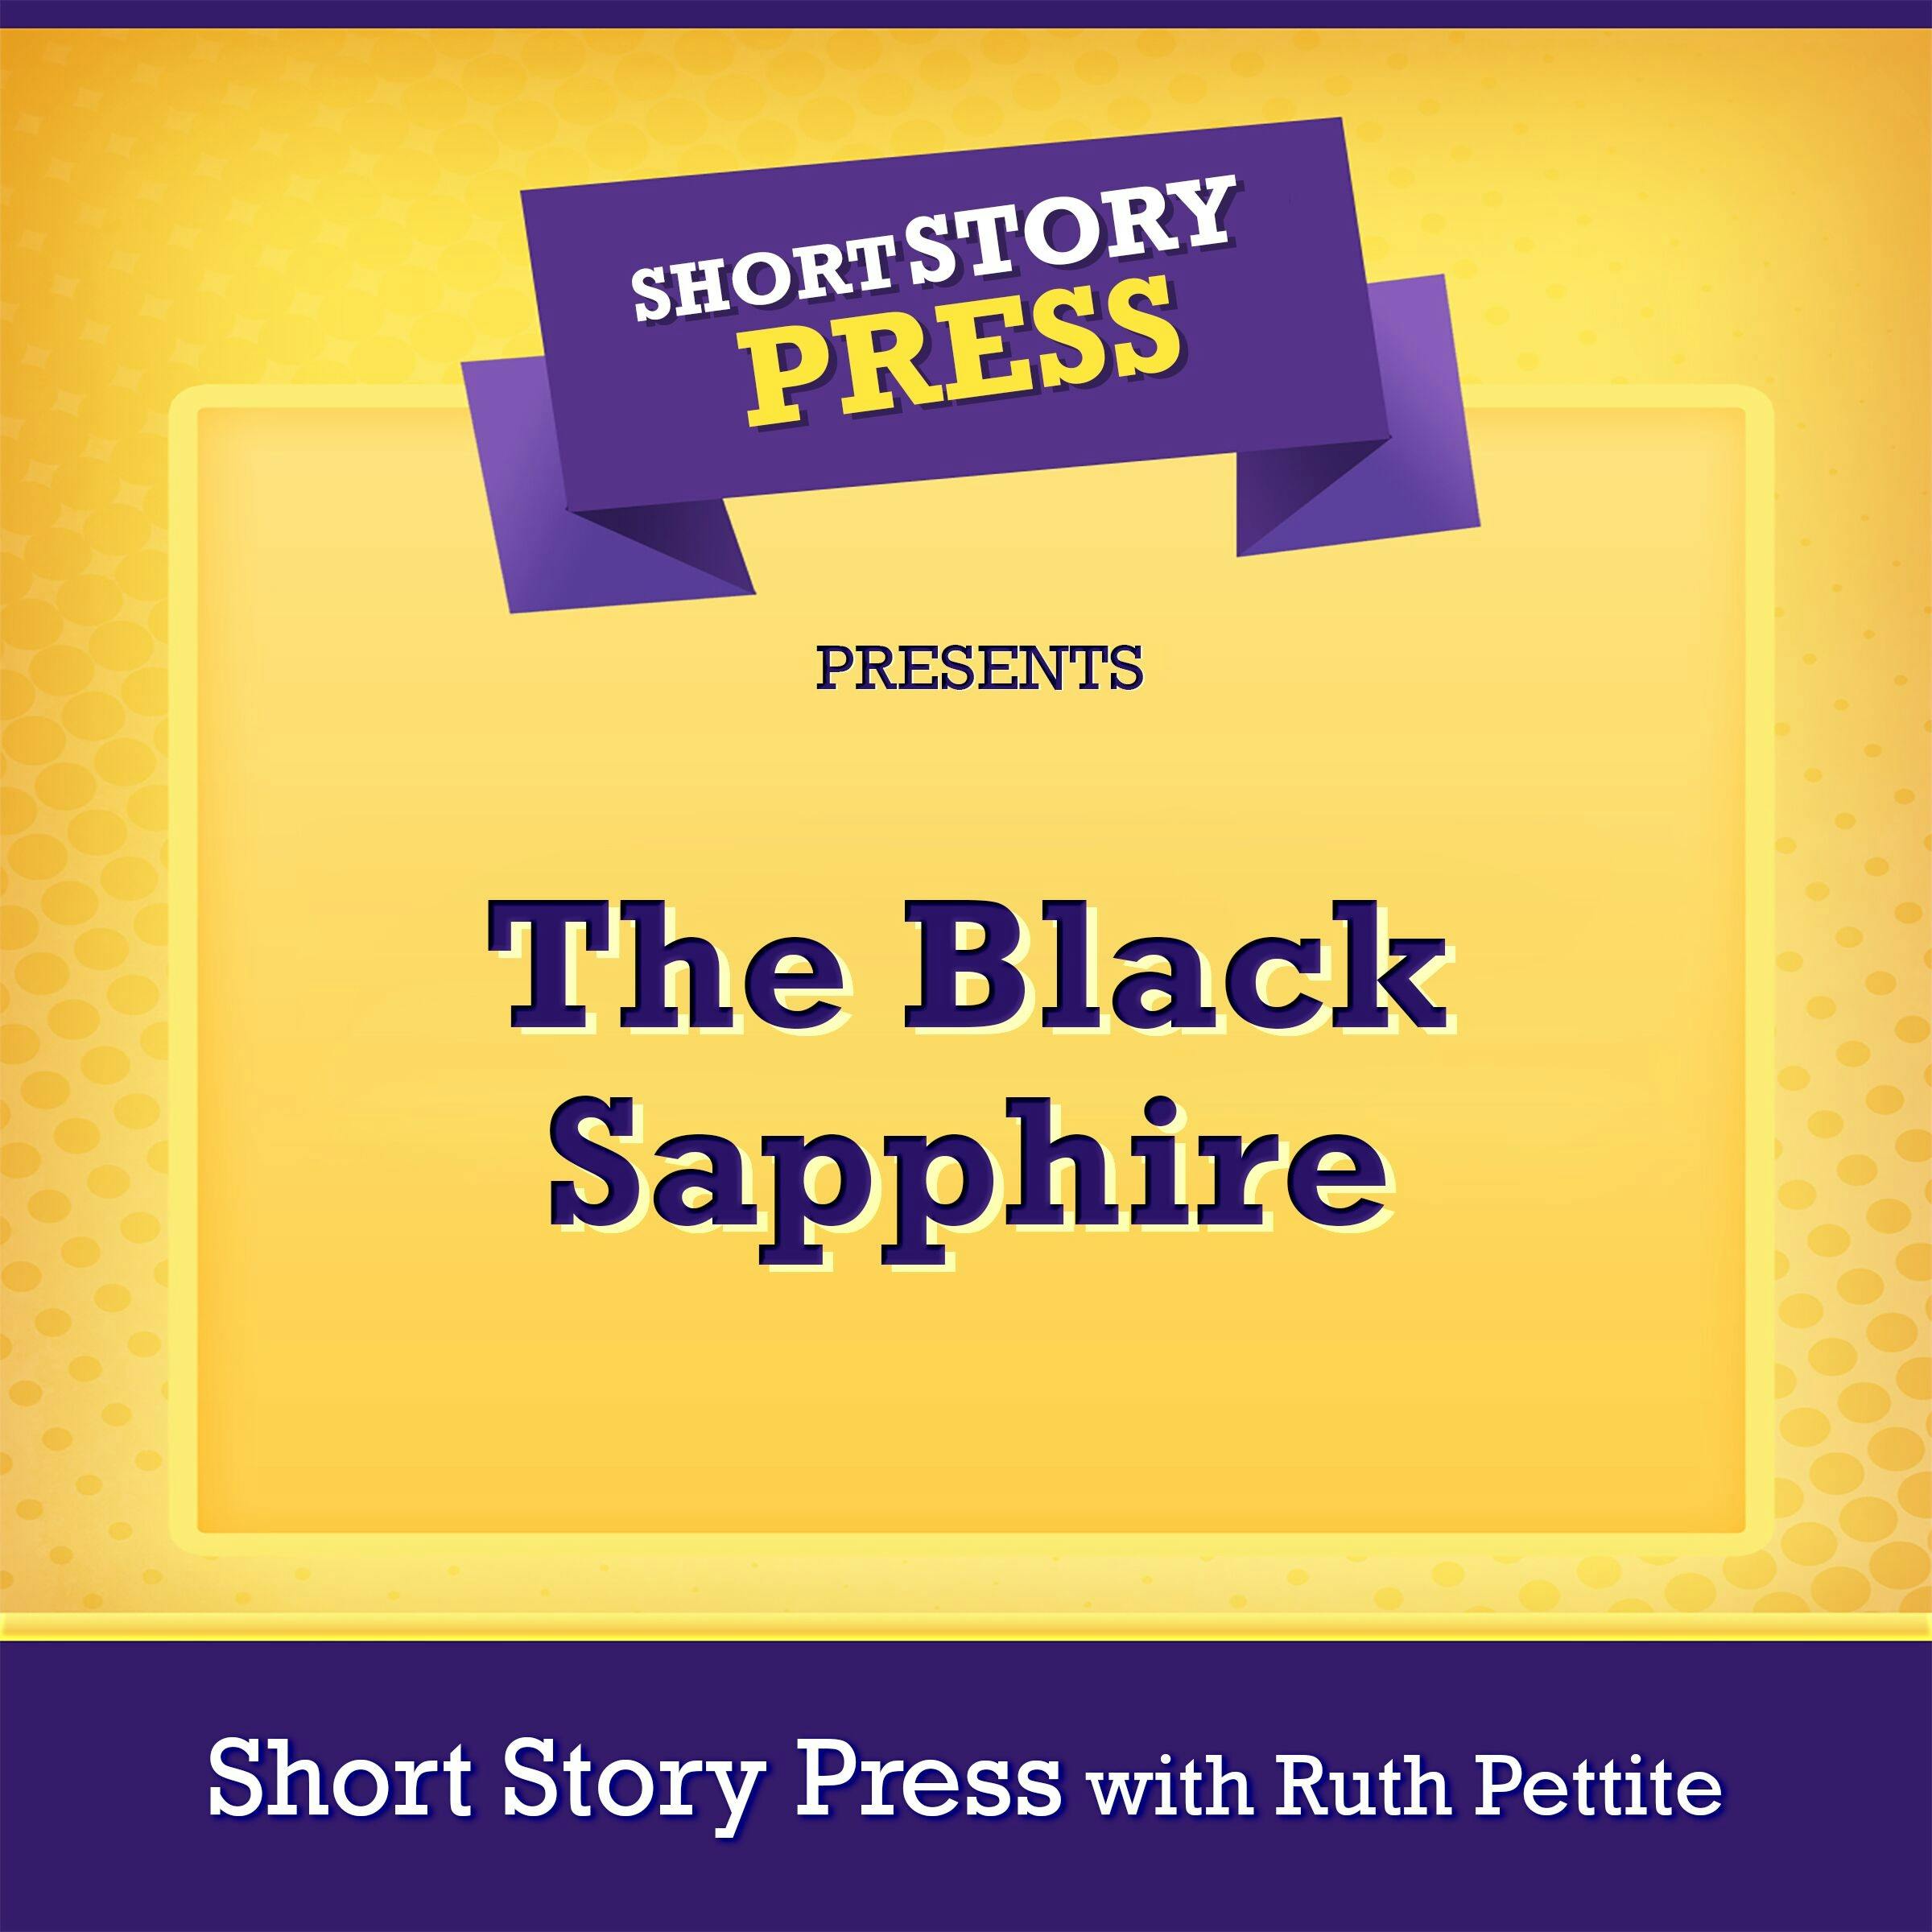 Short Story Press Presents The Black Sapphire - undefined